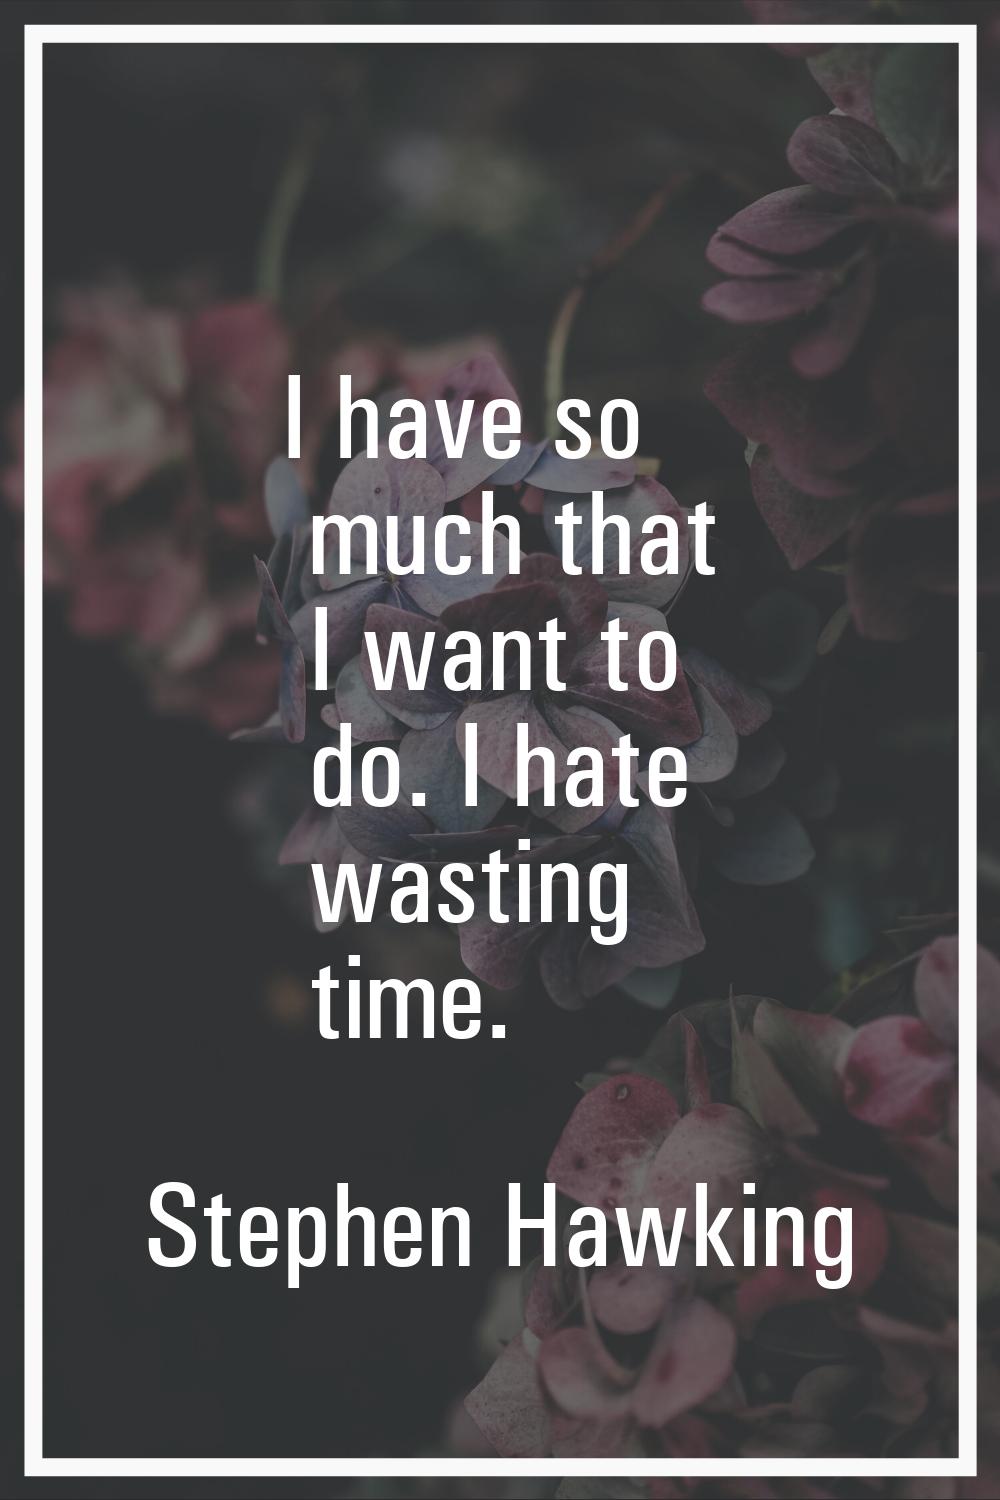 I have so much that I want to do. I hate wasting time.